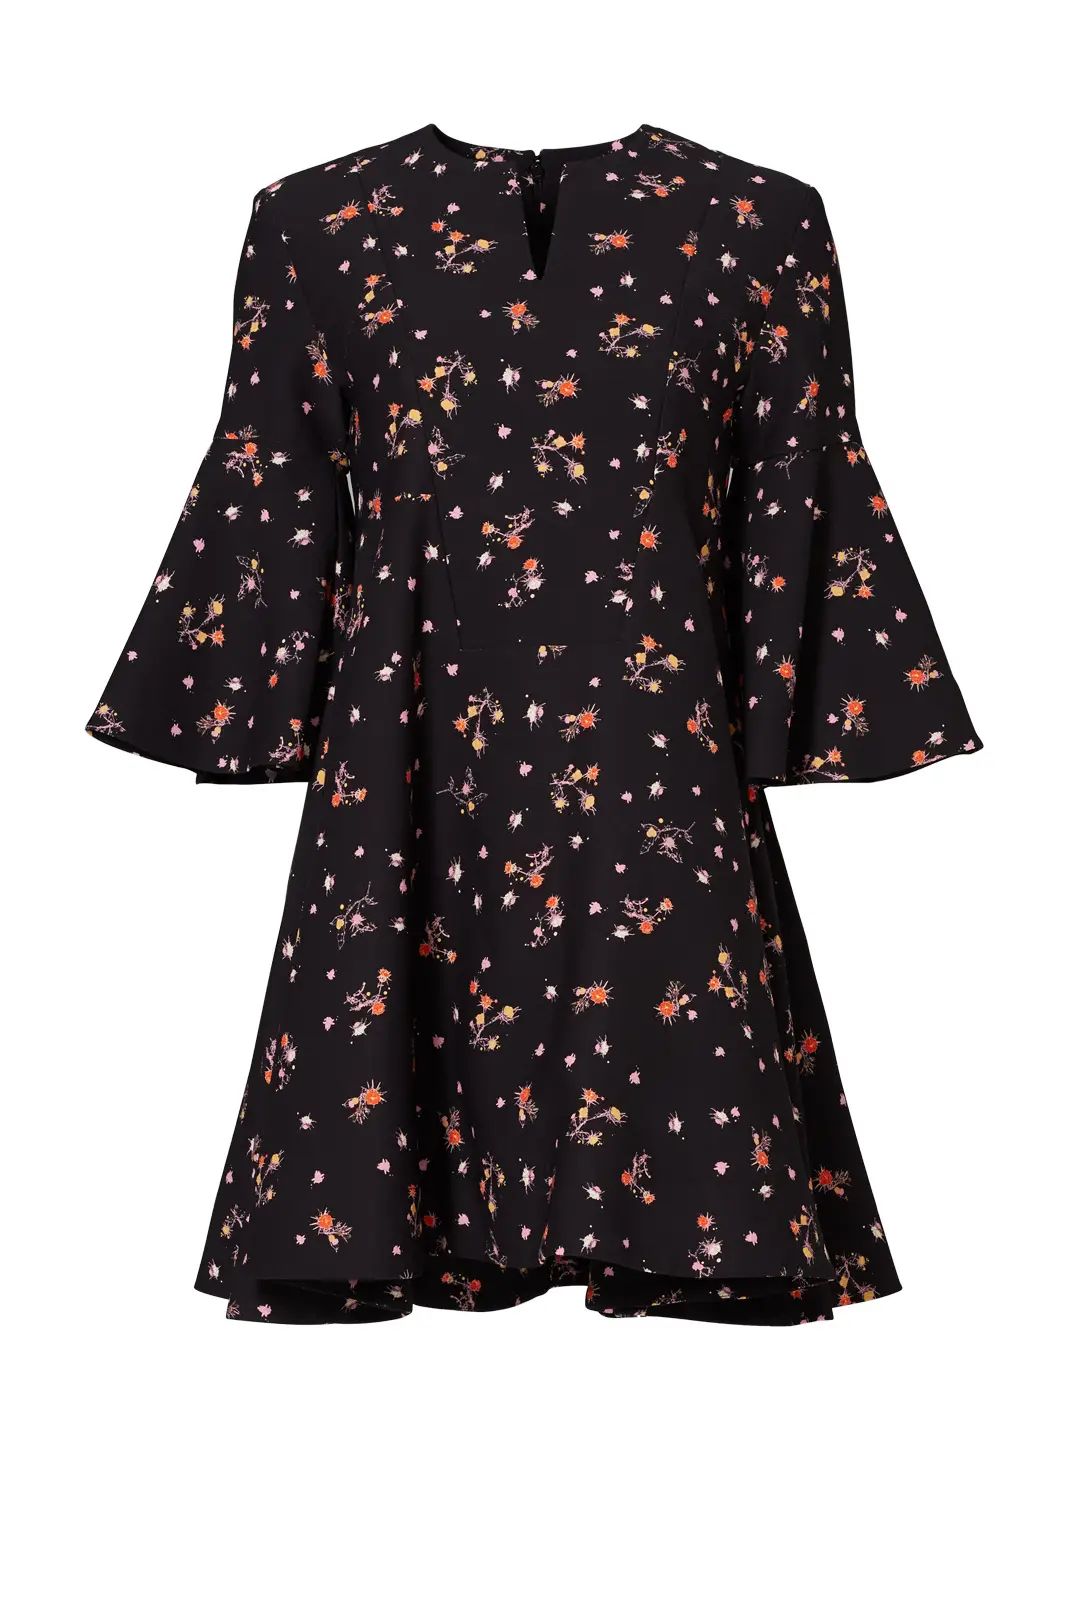 Carven Navy Dotted Floral Dress | Rent The Runway